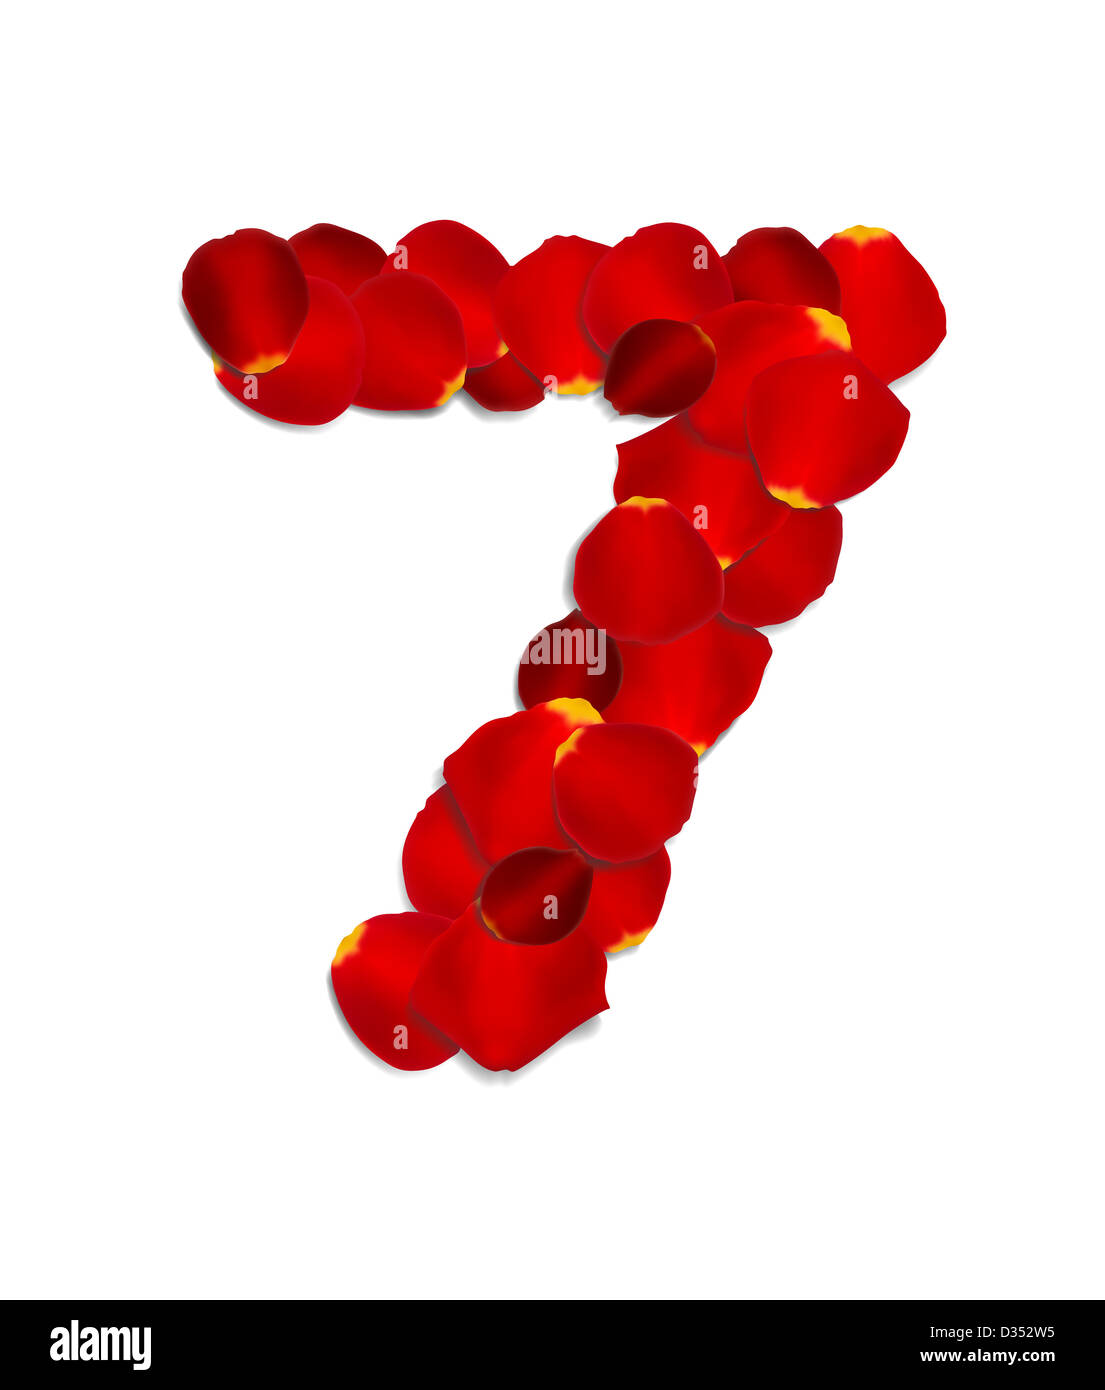 Alphabet H Made From Red Petals Rose Stock Photo, Picture and Royalty Free  Image. Image 13859895.